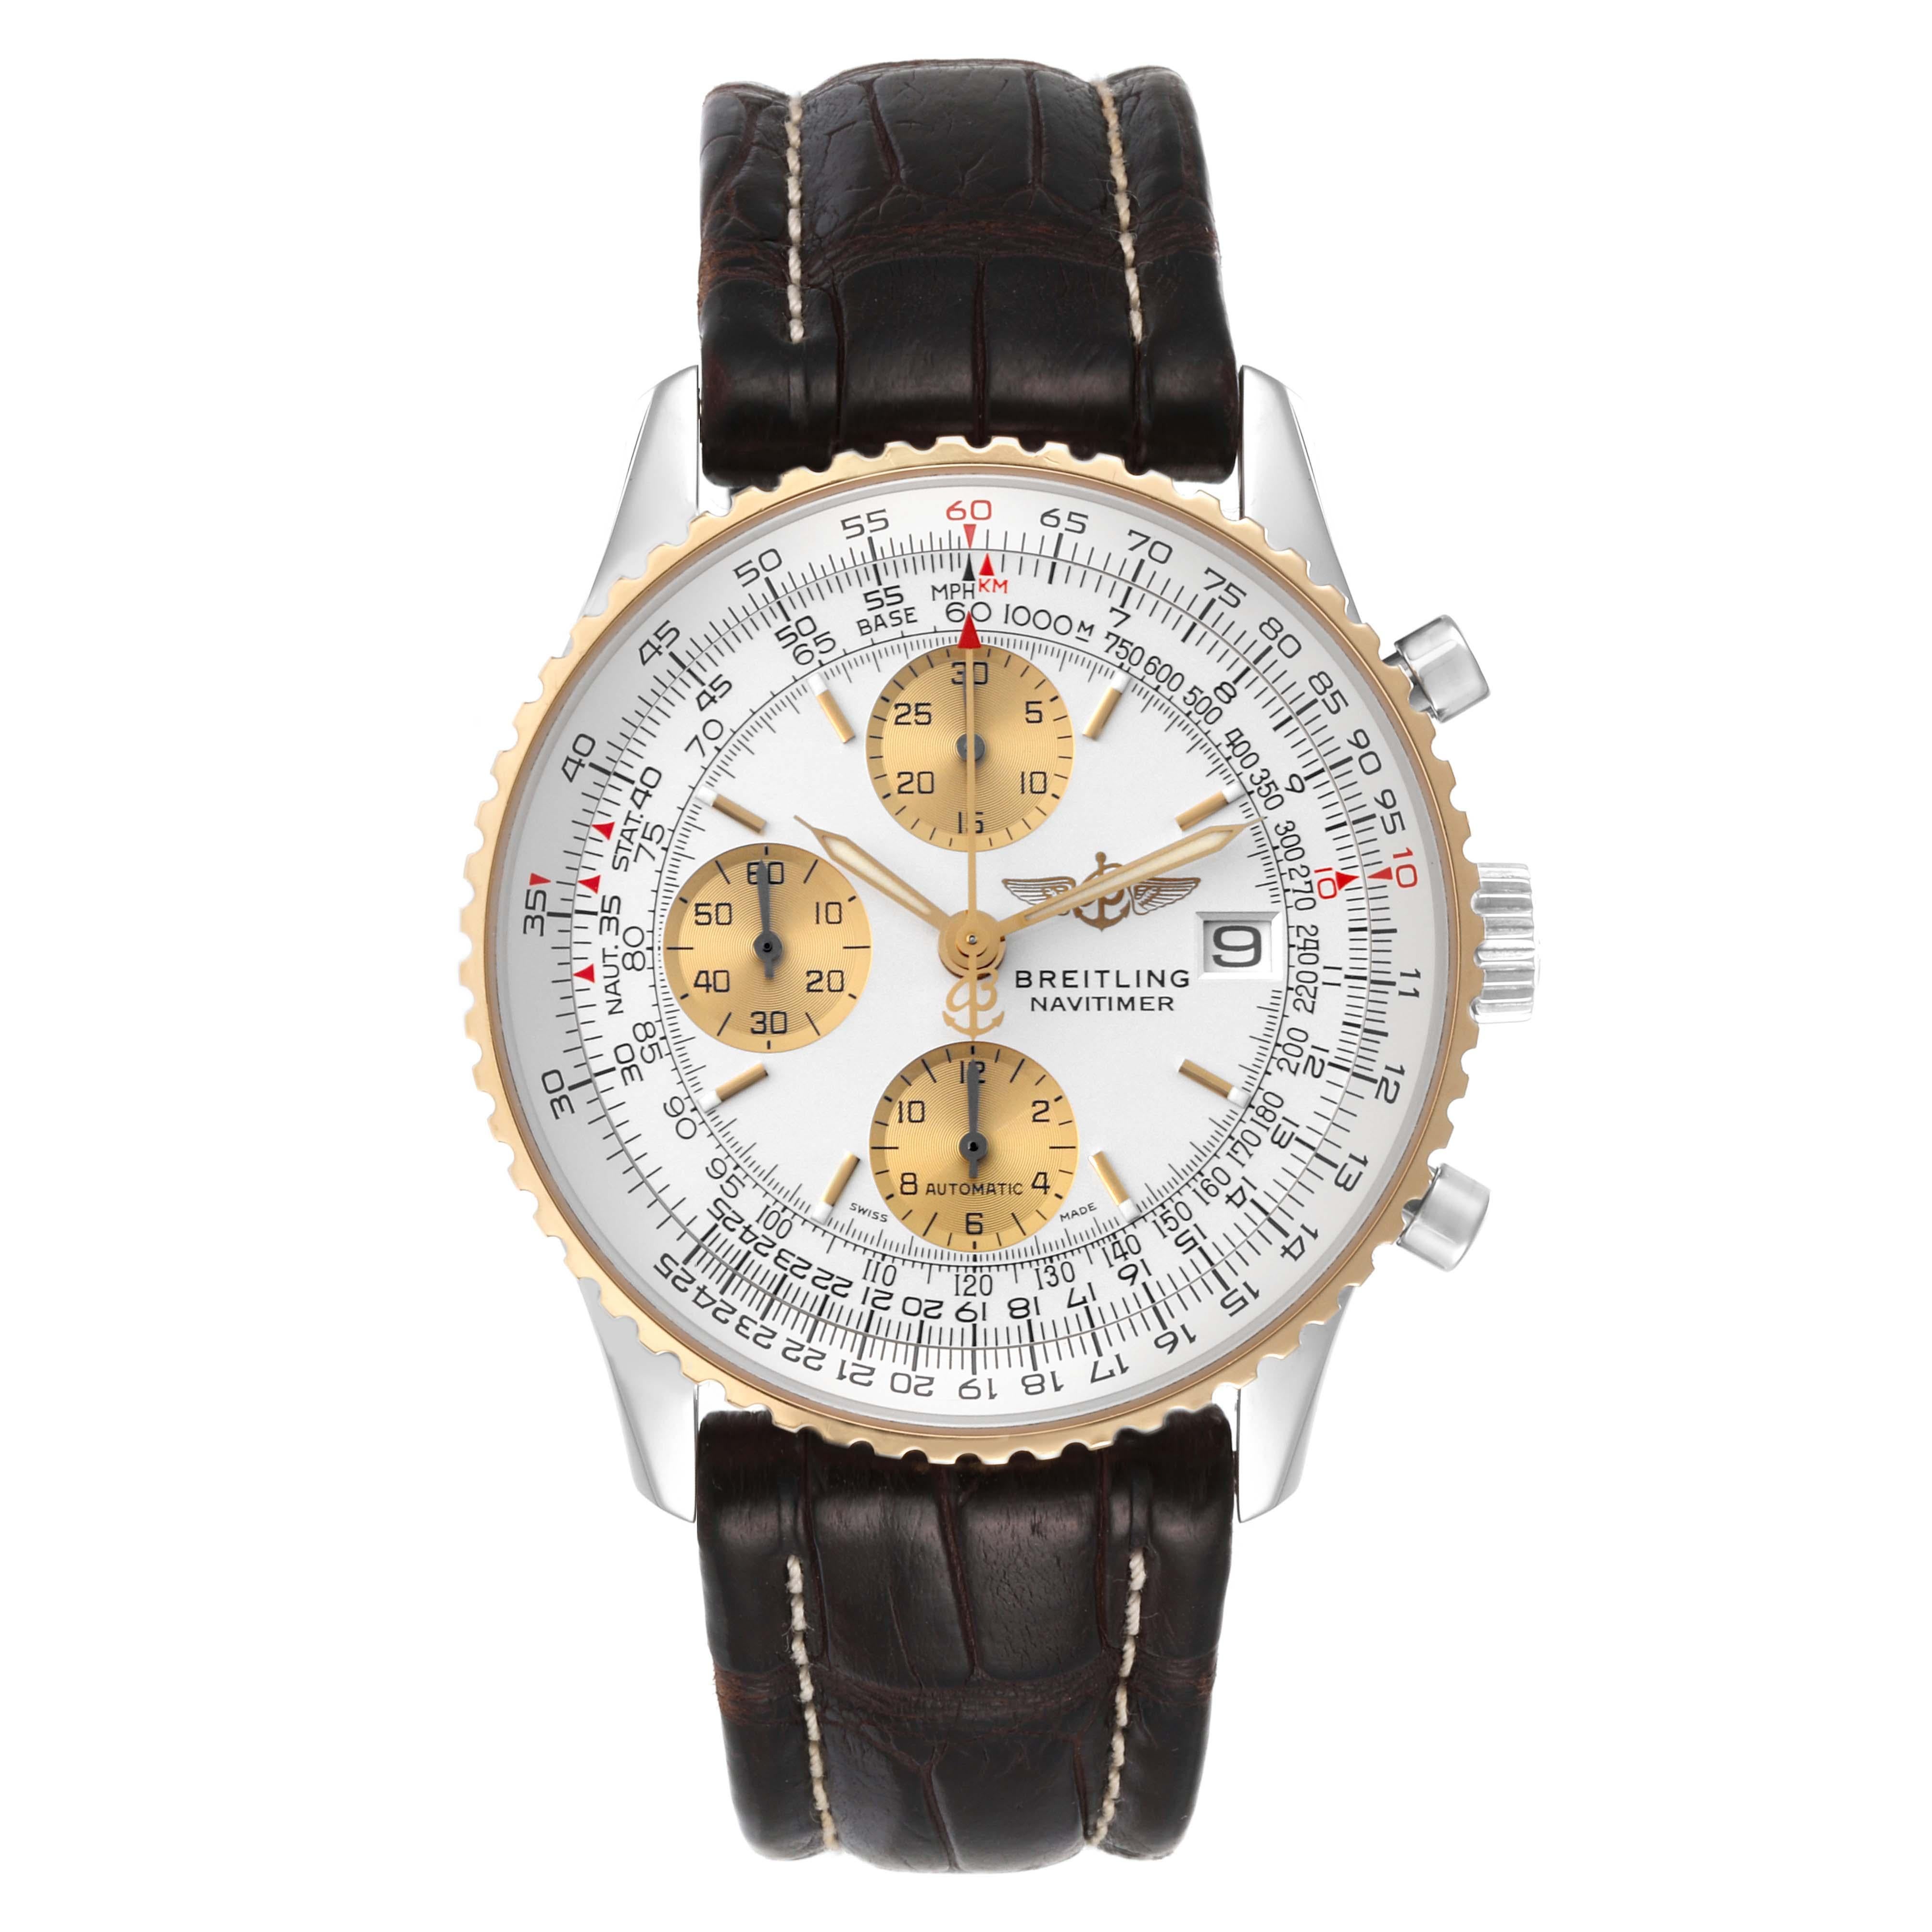 Breitling Navitimer Automatic Steel Yellow Gold Mens Watch D13322. Officially certified chronometer automatic self-winding movement. Chronograph function. Stainless steel case 41.5 mm in diameter. 18k yellow gold bidirectional rotating bezel.